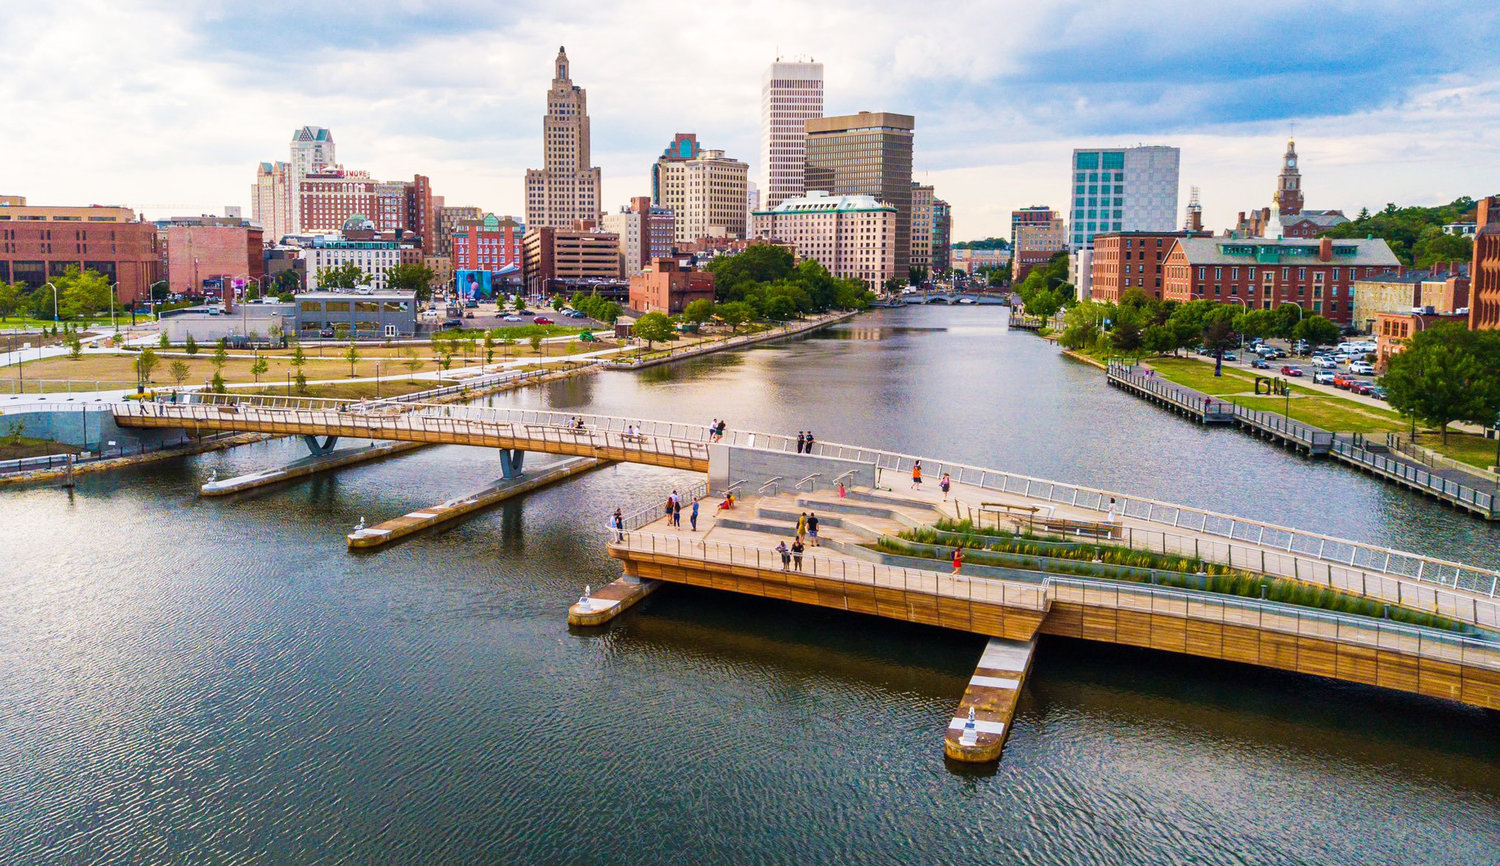 The landscape of the Providence skyline and the new pedestrian bridge, now open to pedestrians.